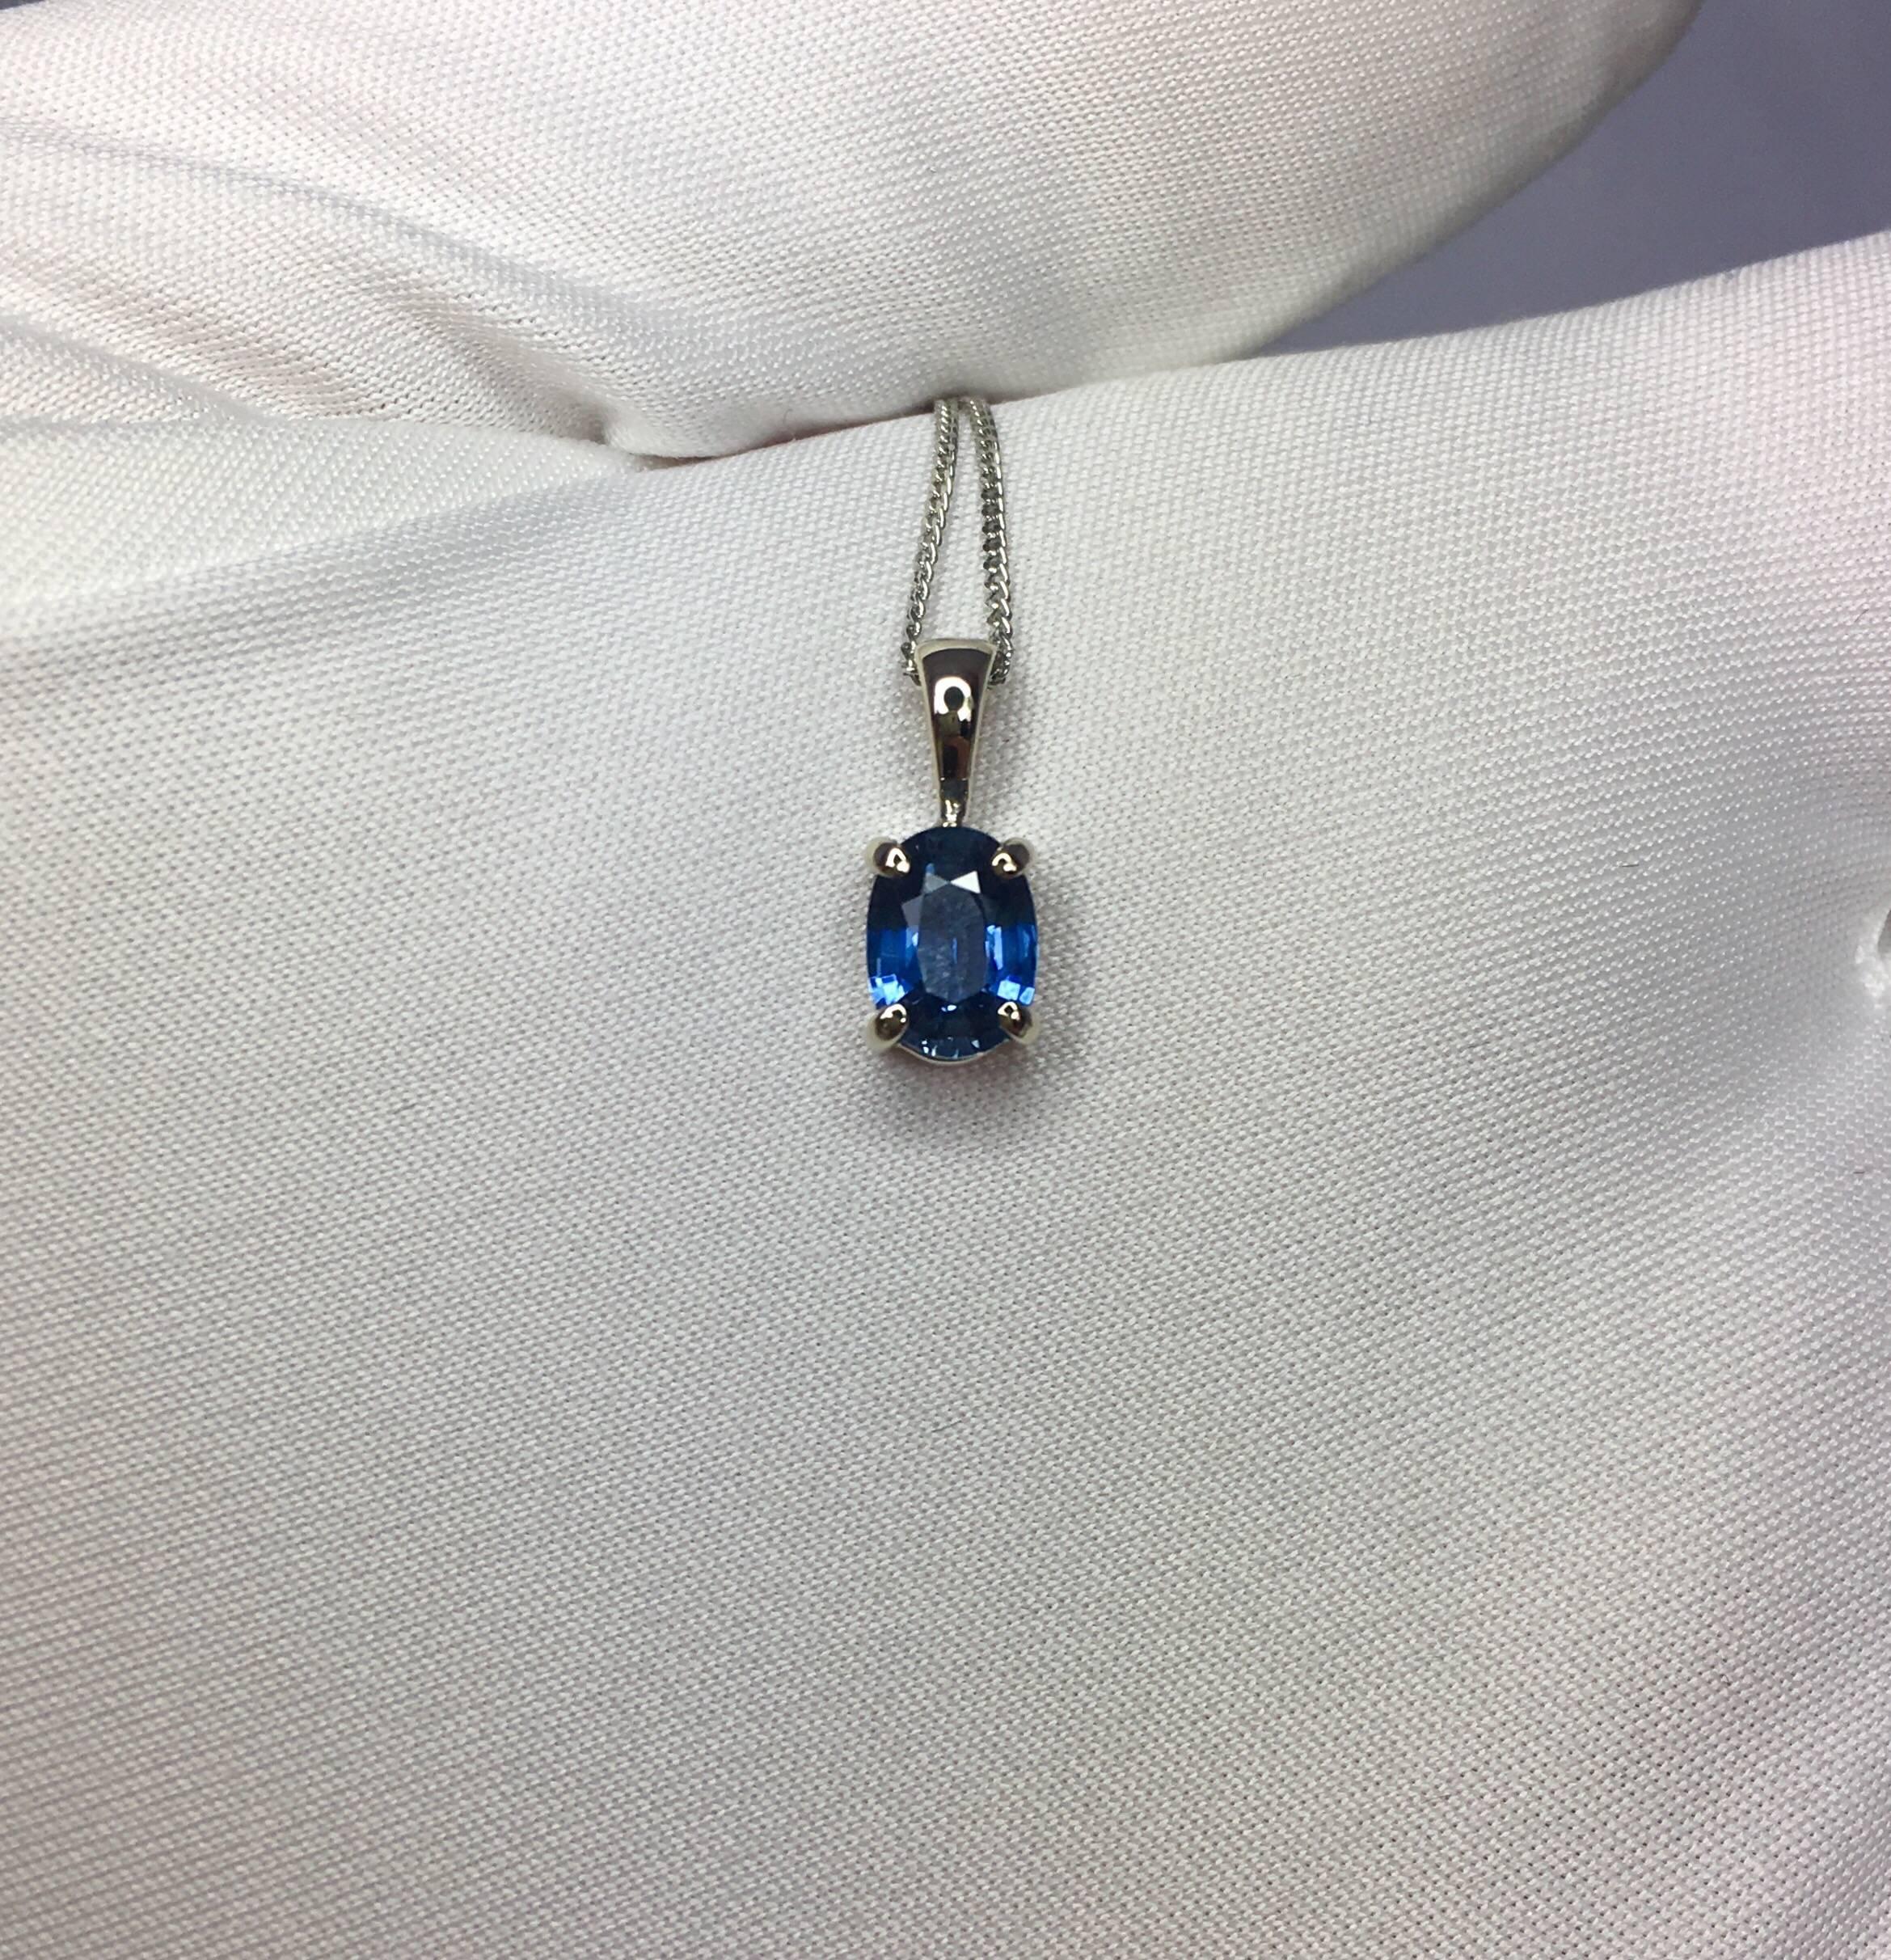 Beautiful natural 1.00 carat blue Sapphire set in a fine 18k white gold solitaire pendant.

Stunning blue sapphire with fine bright blue colour and excellent clarity. Very clean.

It also has an excellent oval cut which shows lots of brightness and